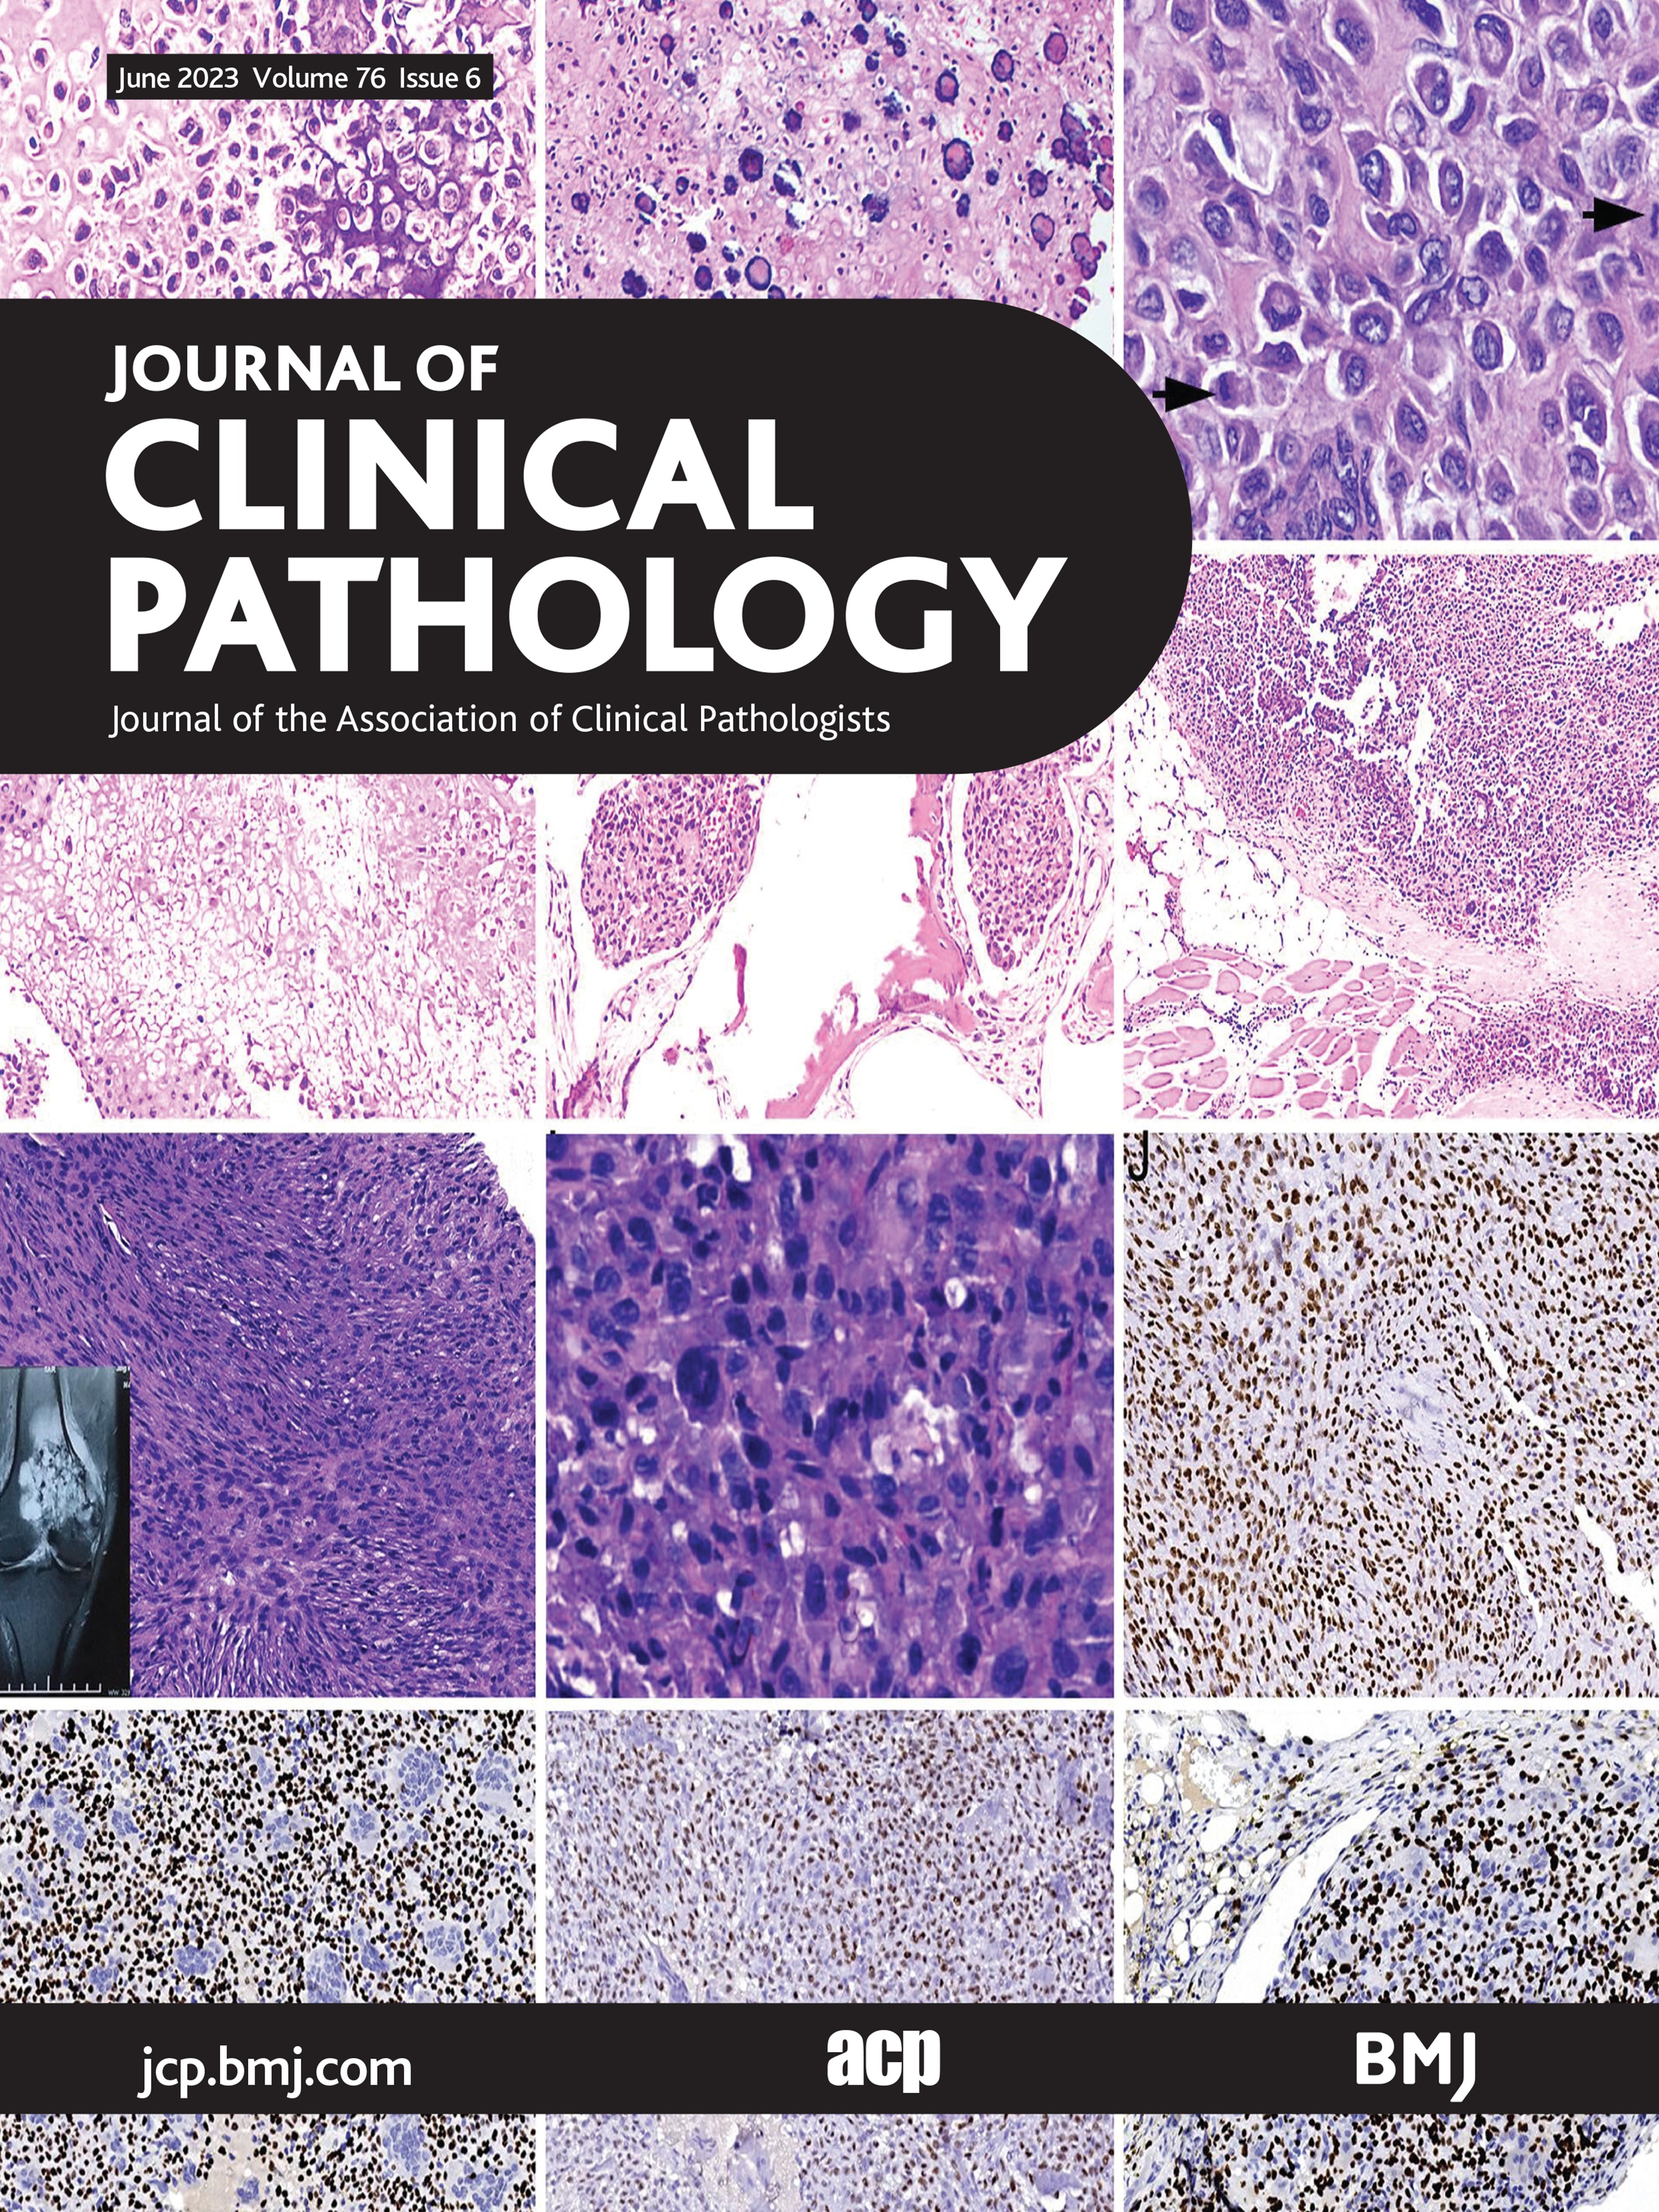 Results of histopathological revisions of major salivary gland neoplasms in routine clinical practice